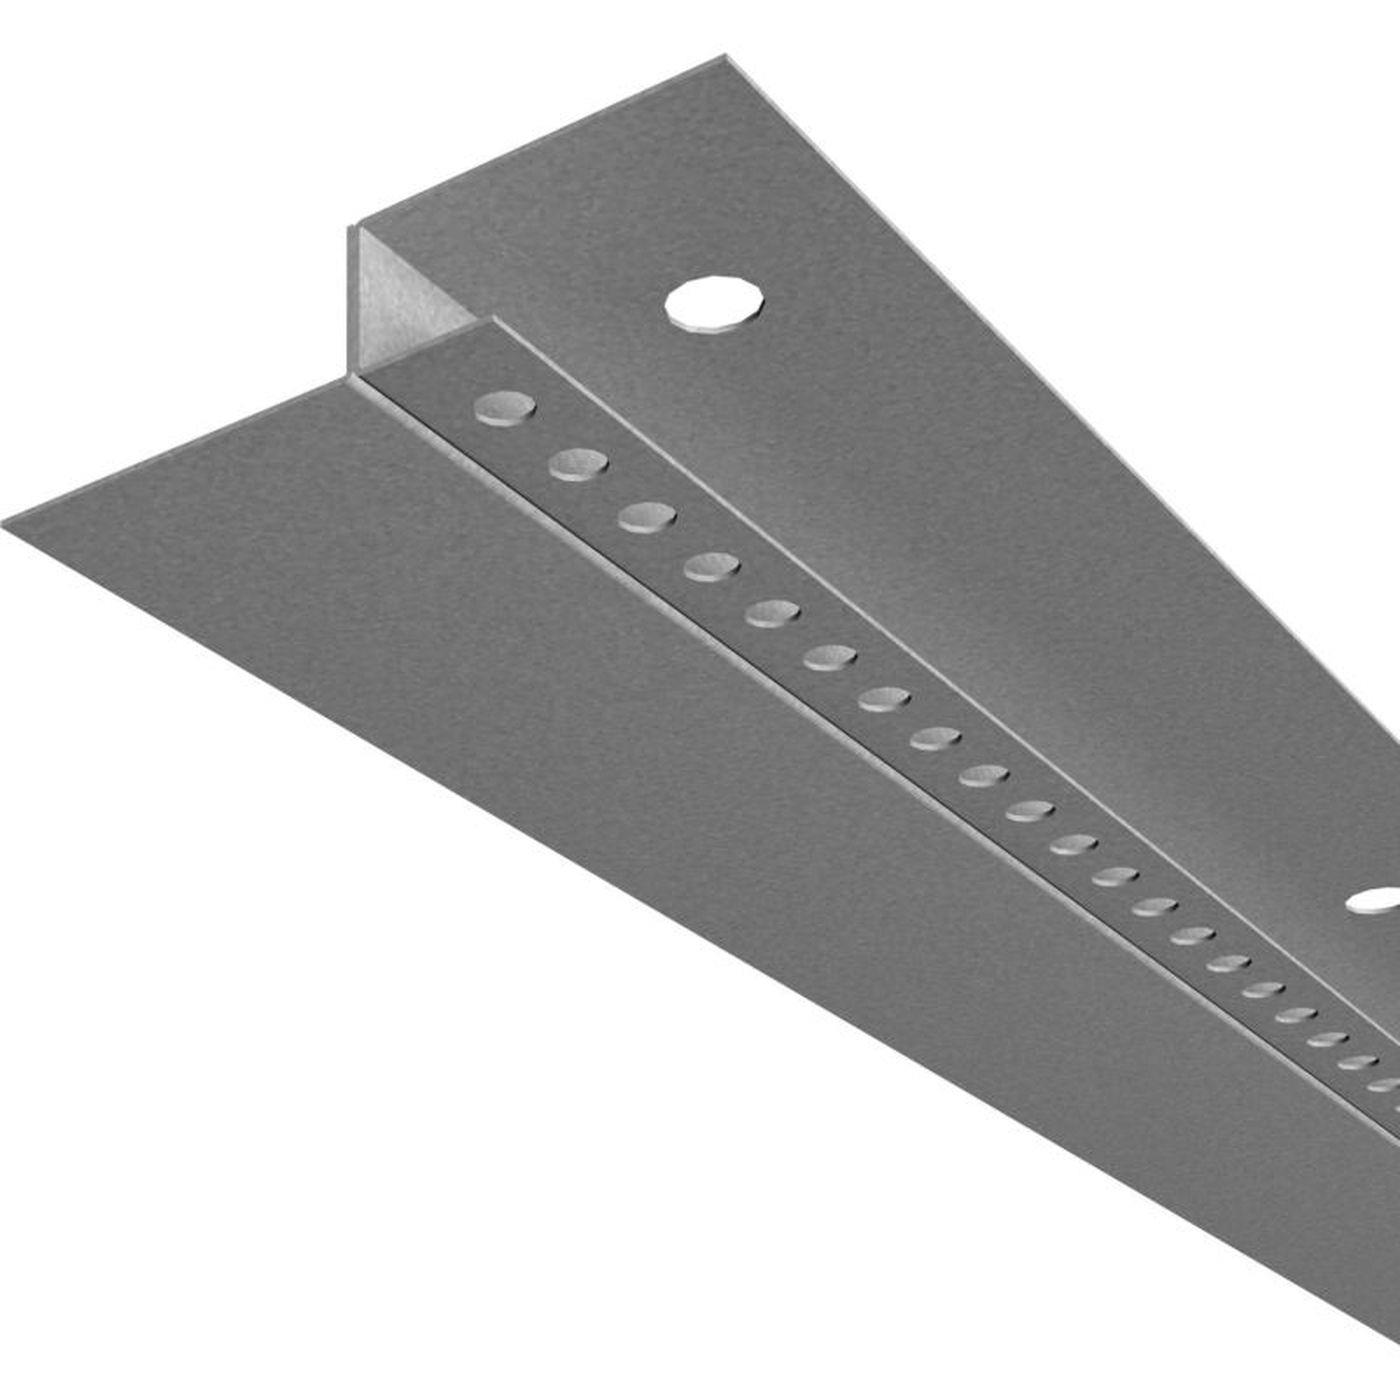 2m LED Drywall profile ADP 35 for backlit, printed glass pictures for Plasterboard Steel Zinc sheet